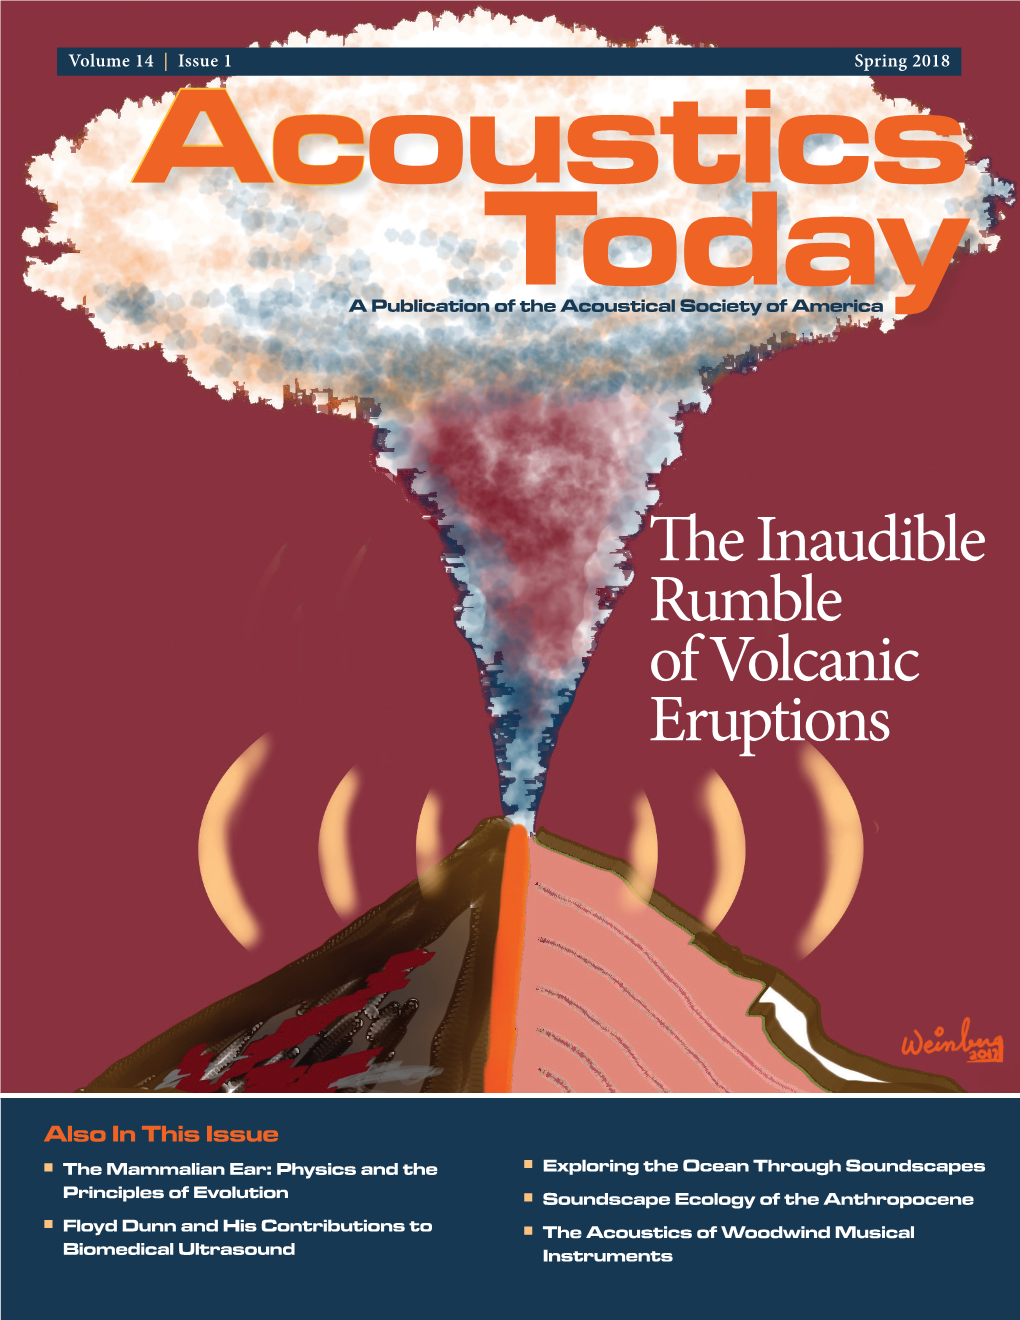 The Inaudible Rumble of Volcanic Eruptions